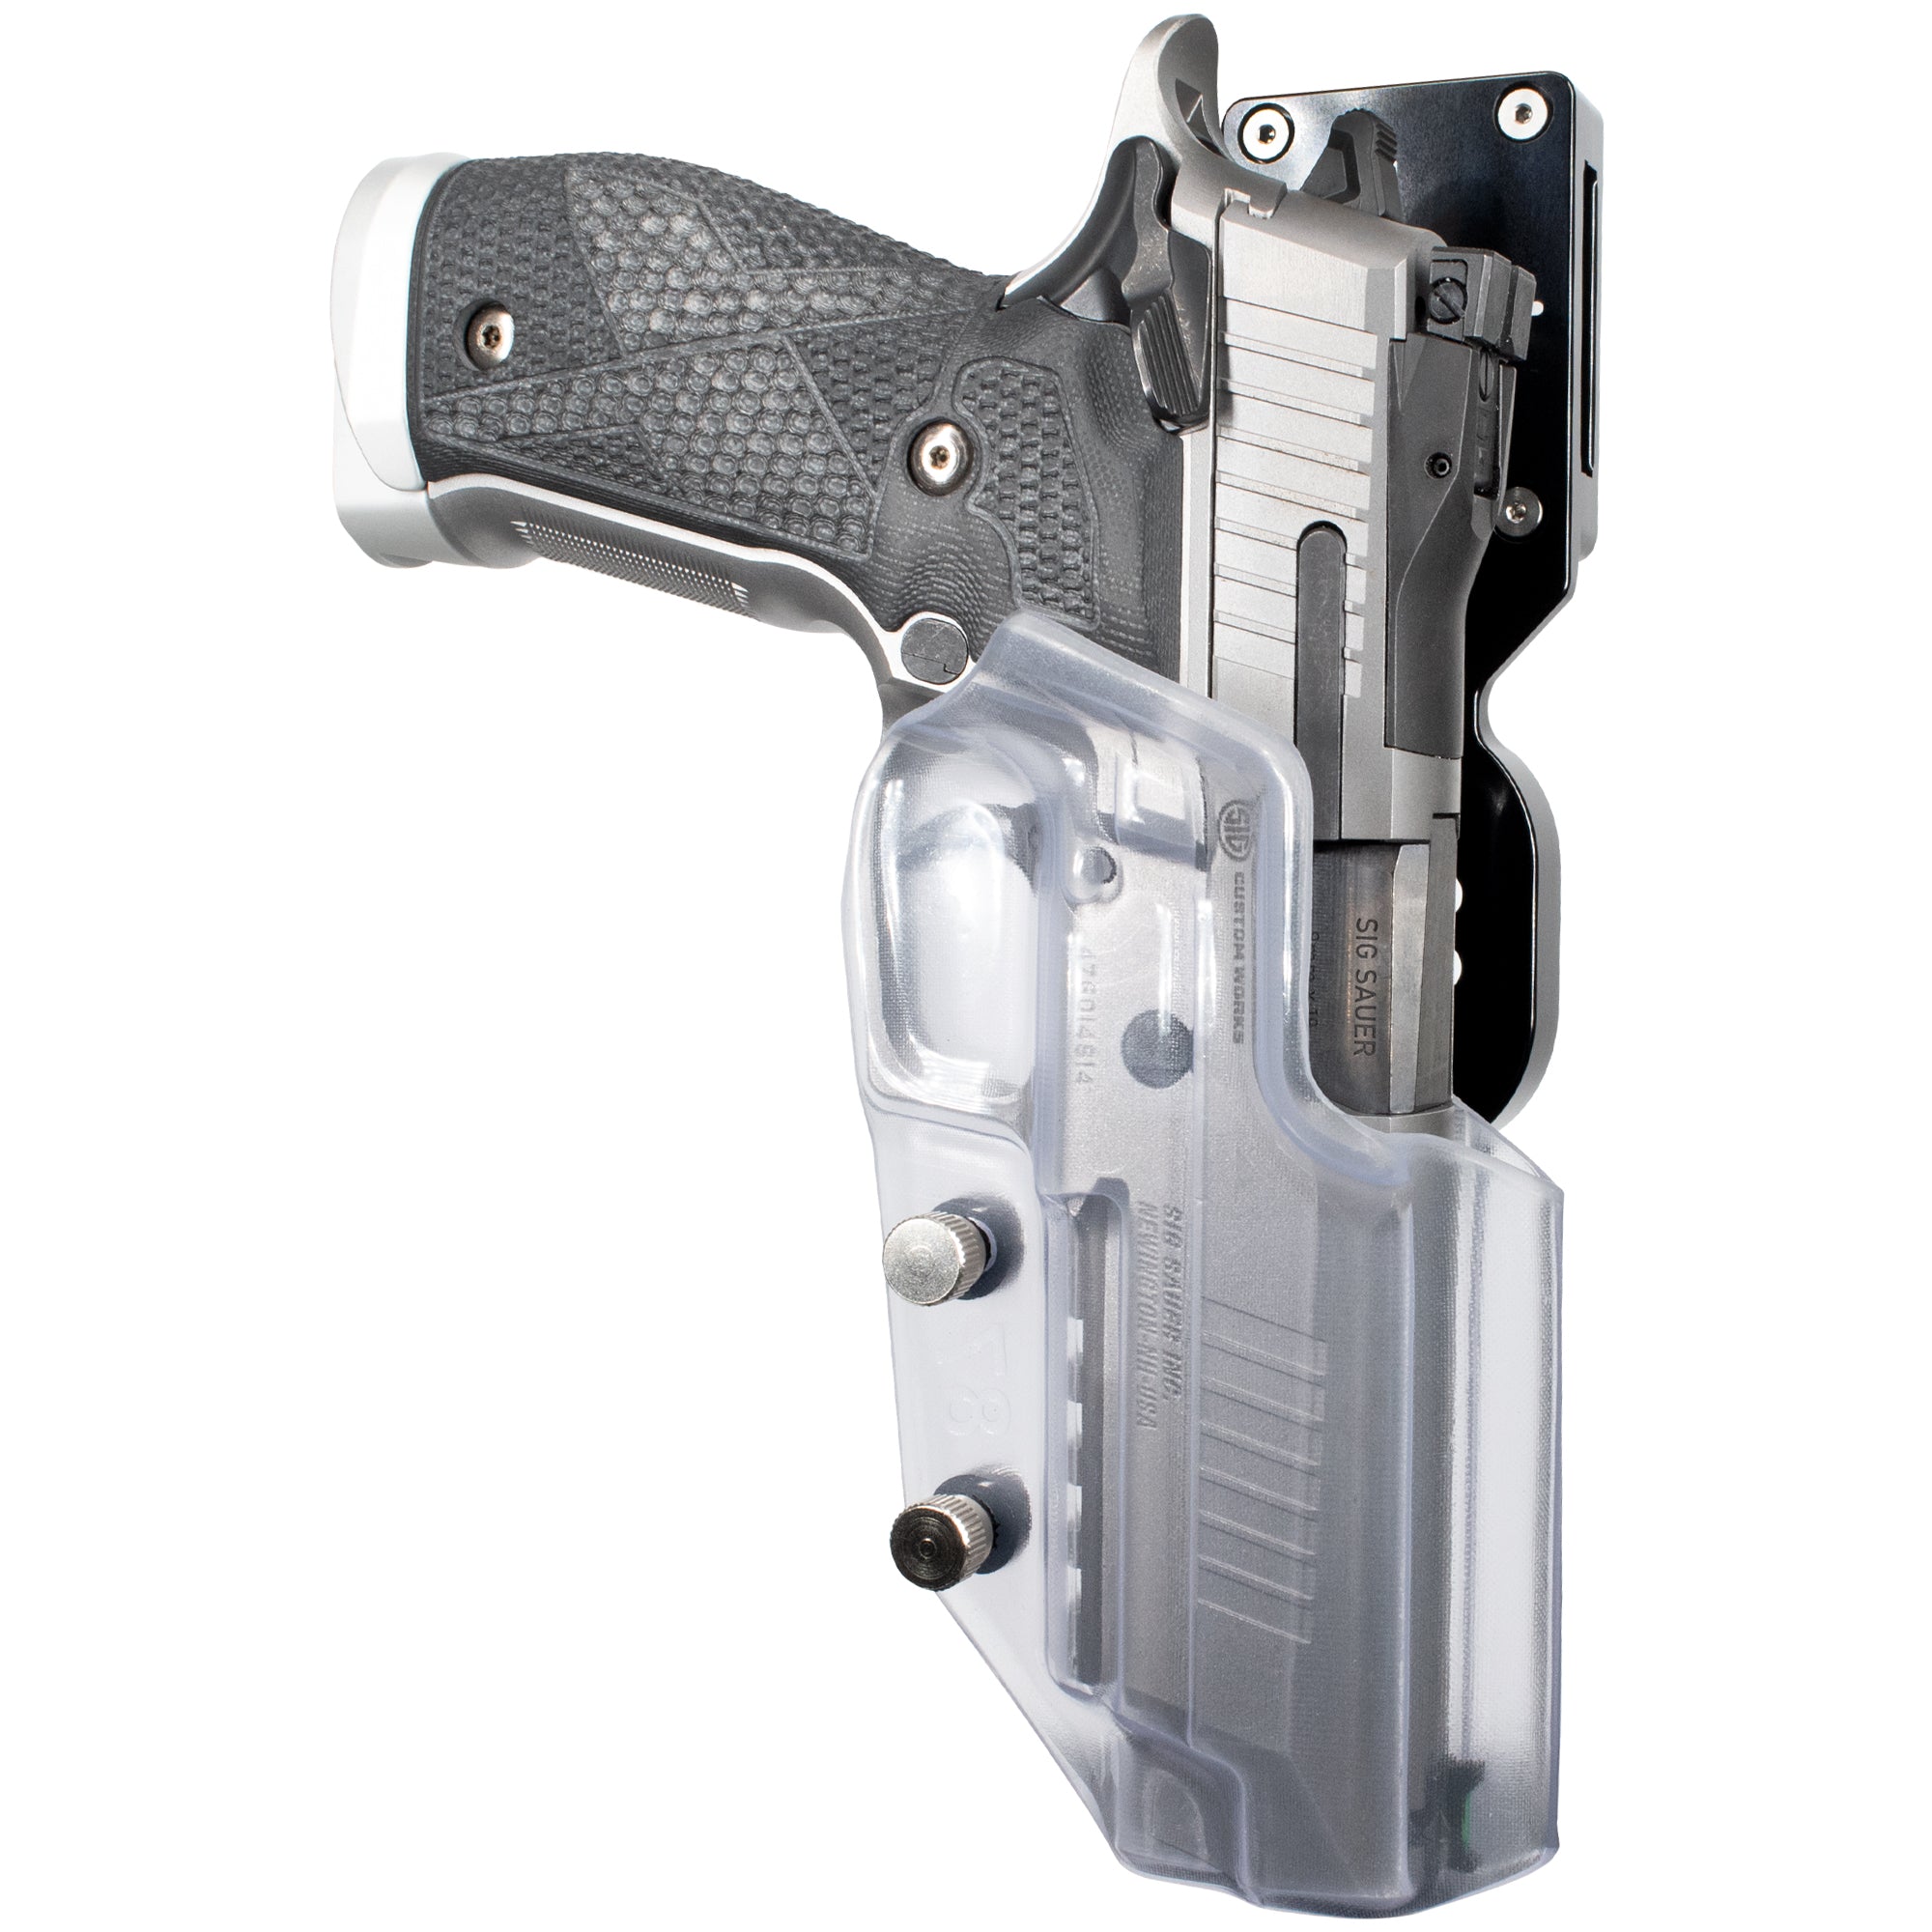 Pro Heavy Duty Competition Holster - Transparent Series